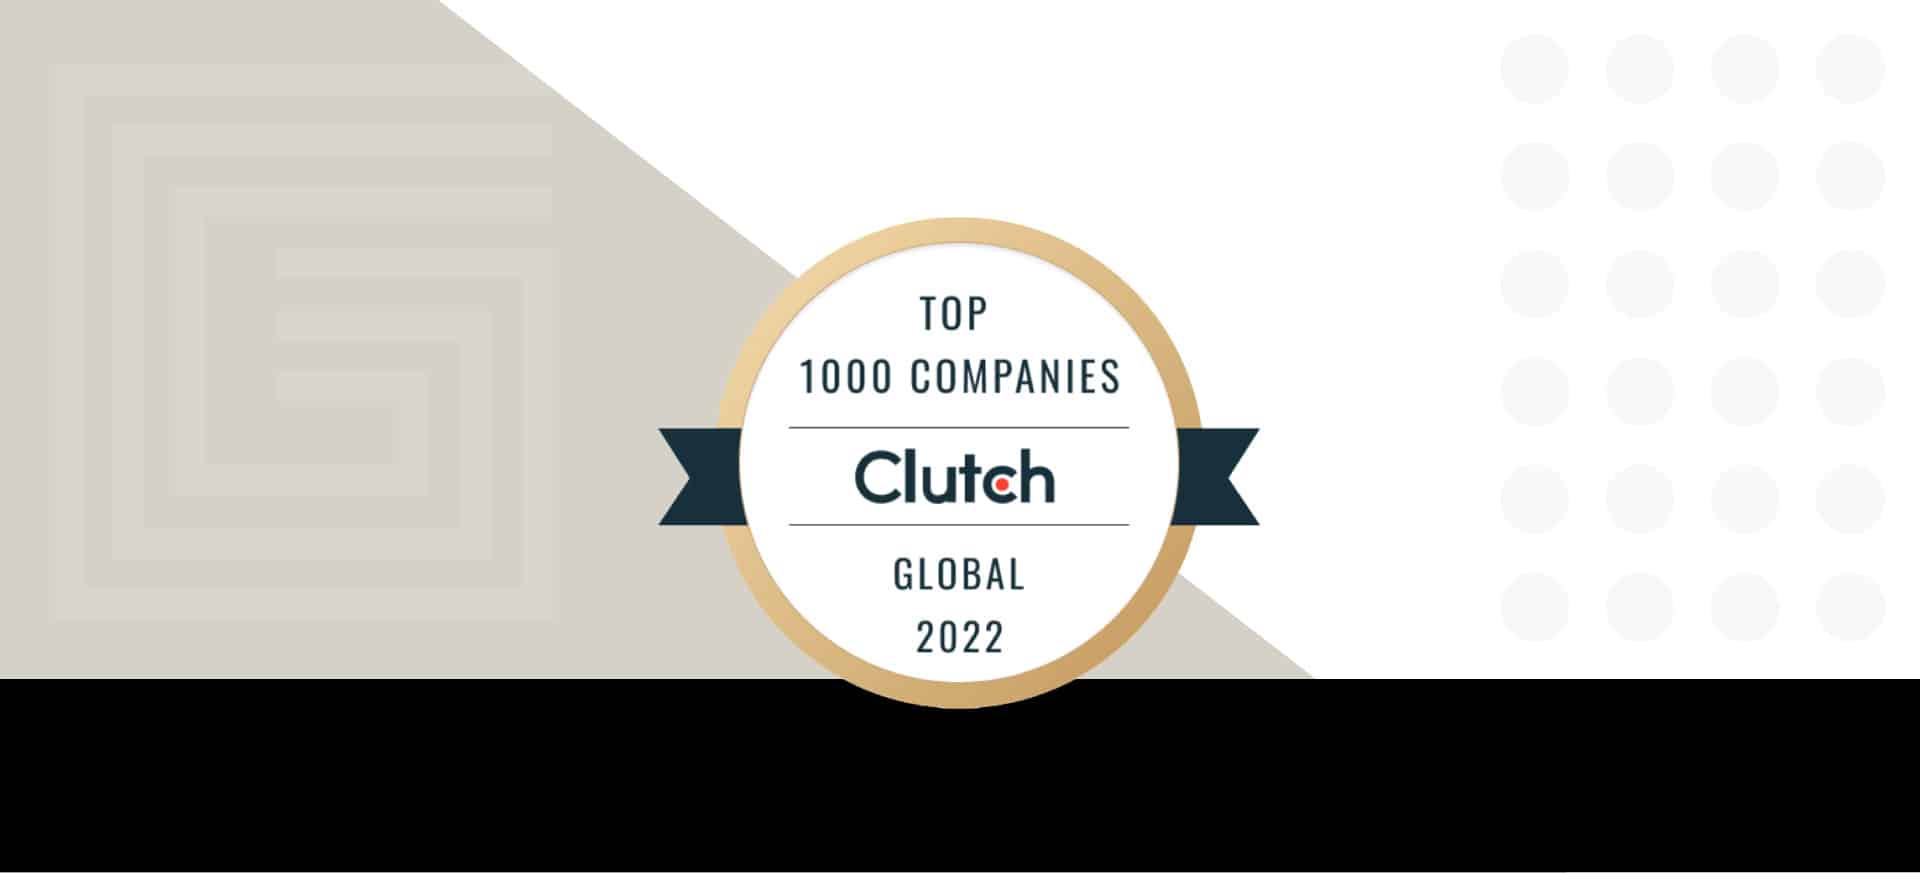 Gorilla Logic Named Among Clutch’s Top 1000 Global Companies for 2022